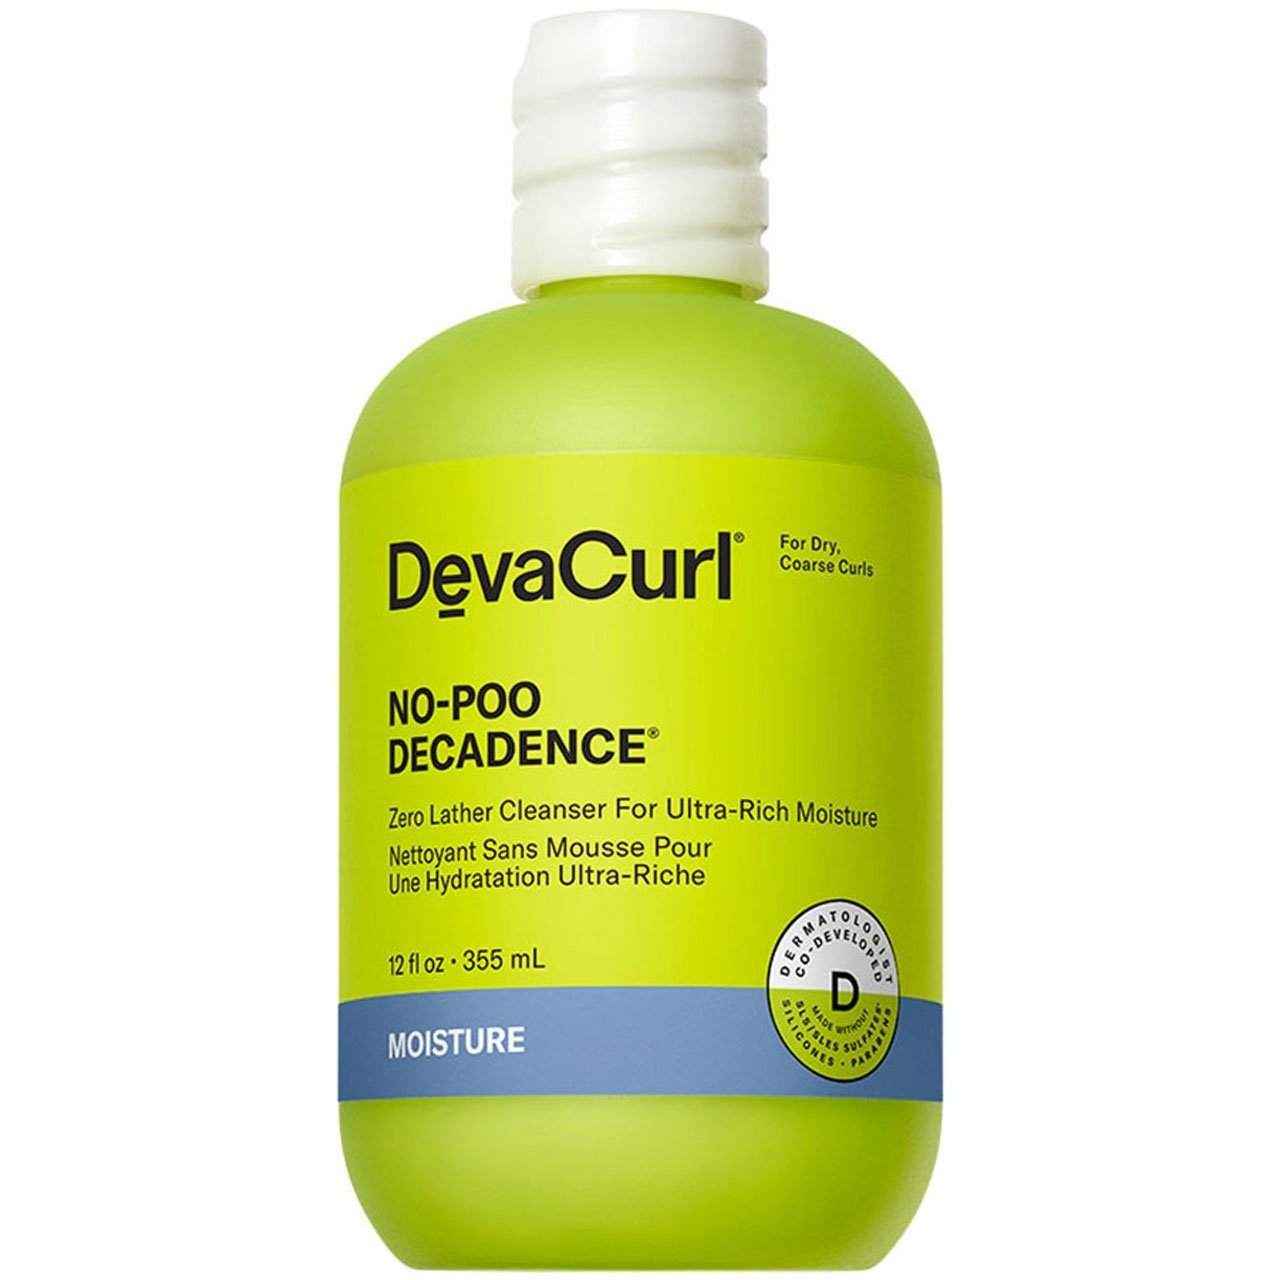 NO-POO DECADENCE Zero Lather Cleanser For Ultra-Rich Moisture